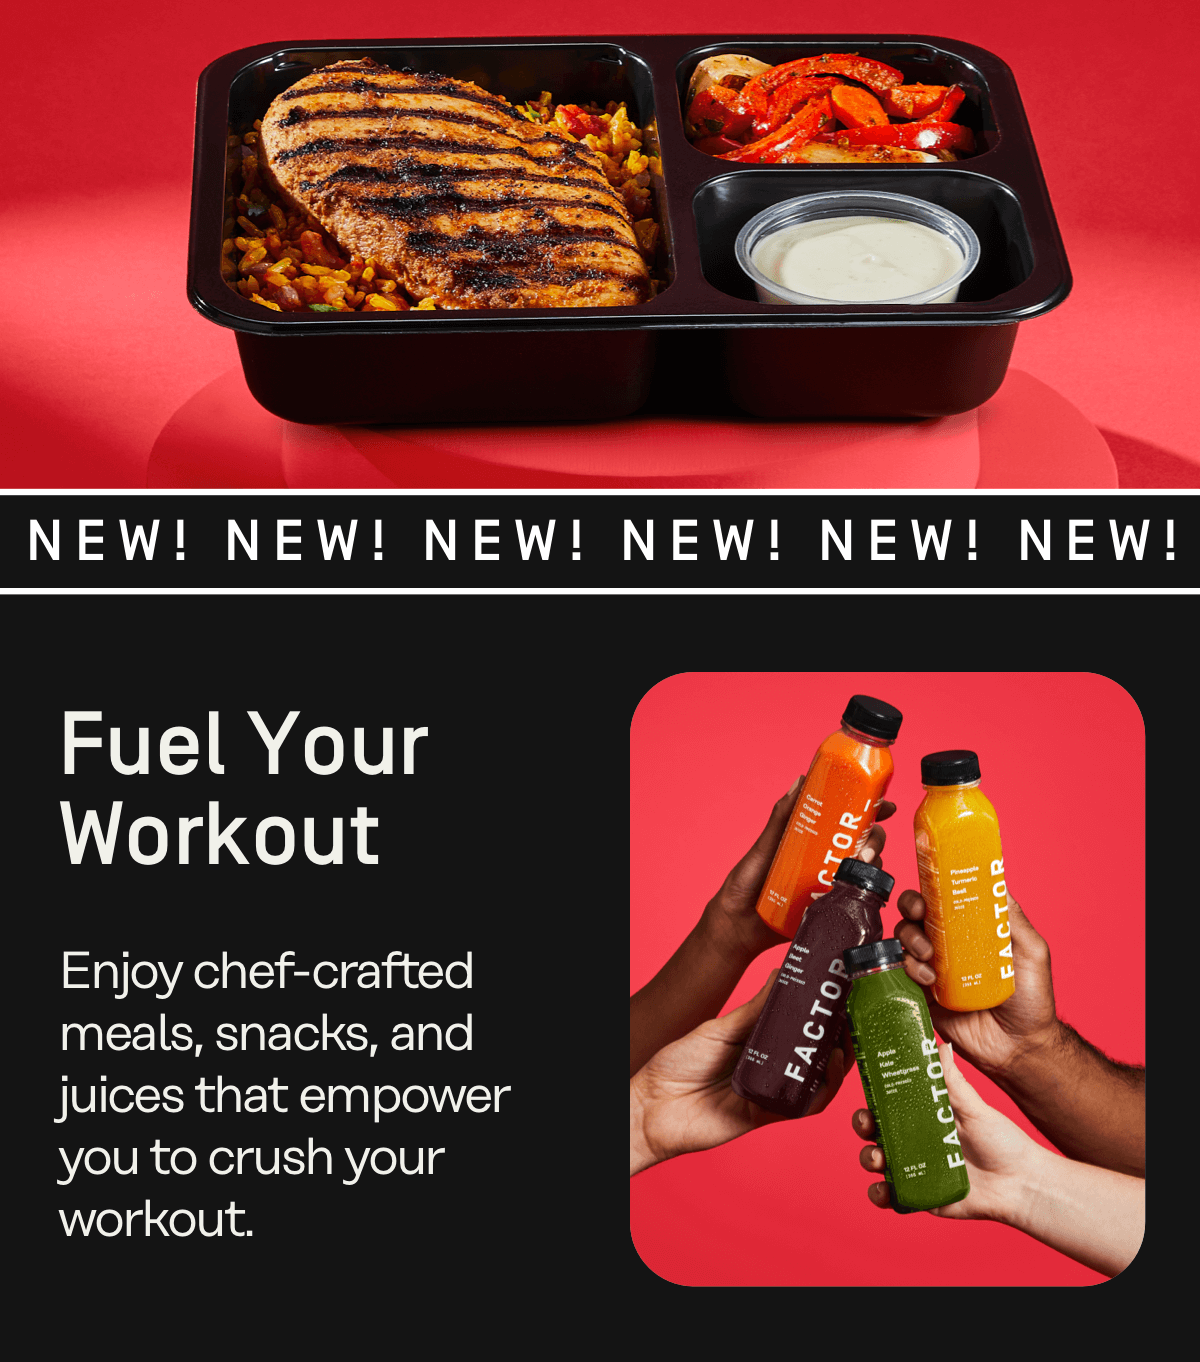 Fuel your workout and enjoy chef-crafted meals, snacks, and juices that empower you to crush your workout